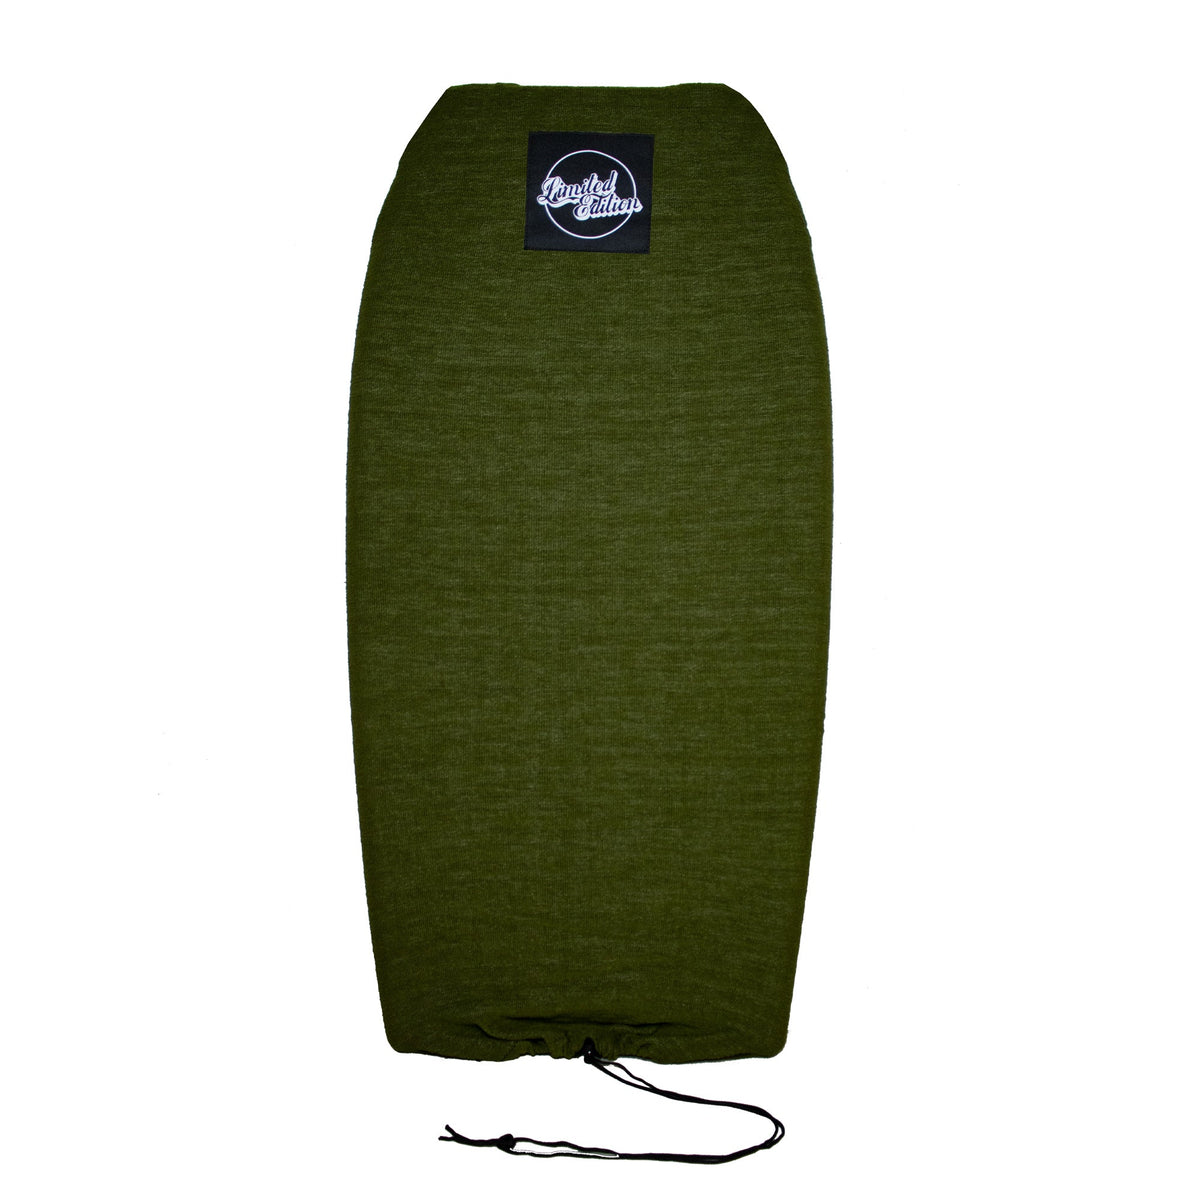 LE Stretch Bodyboard Cover Package Deal